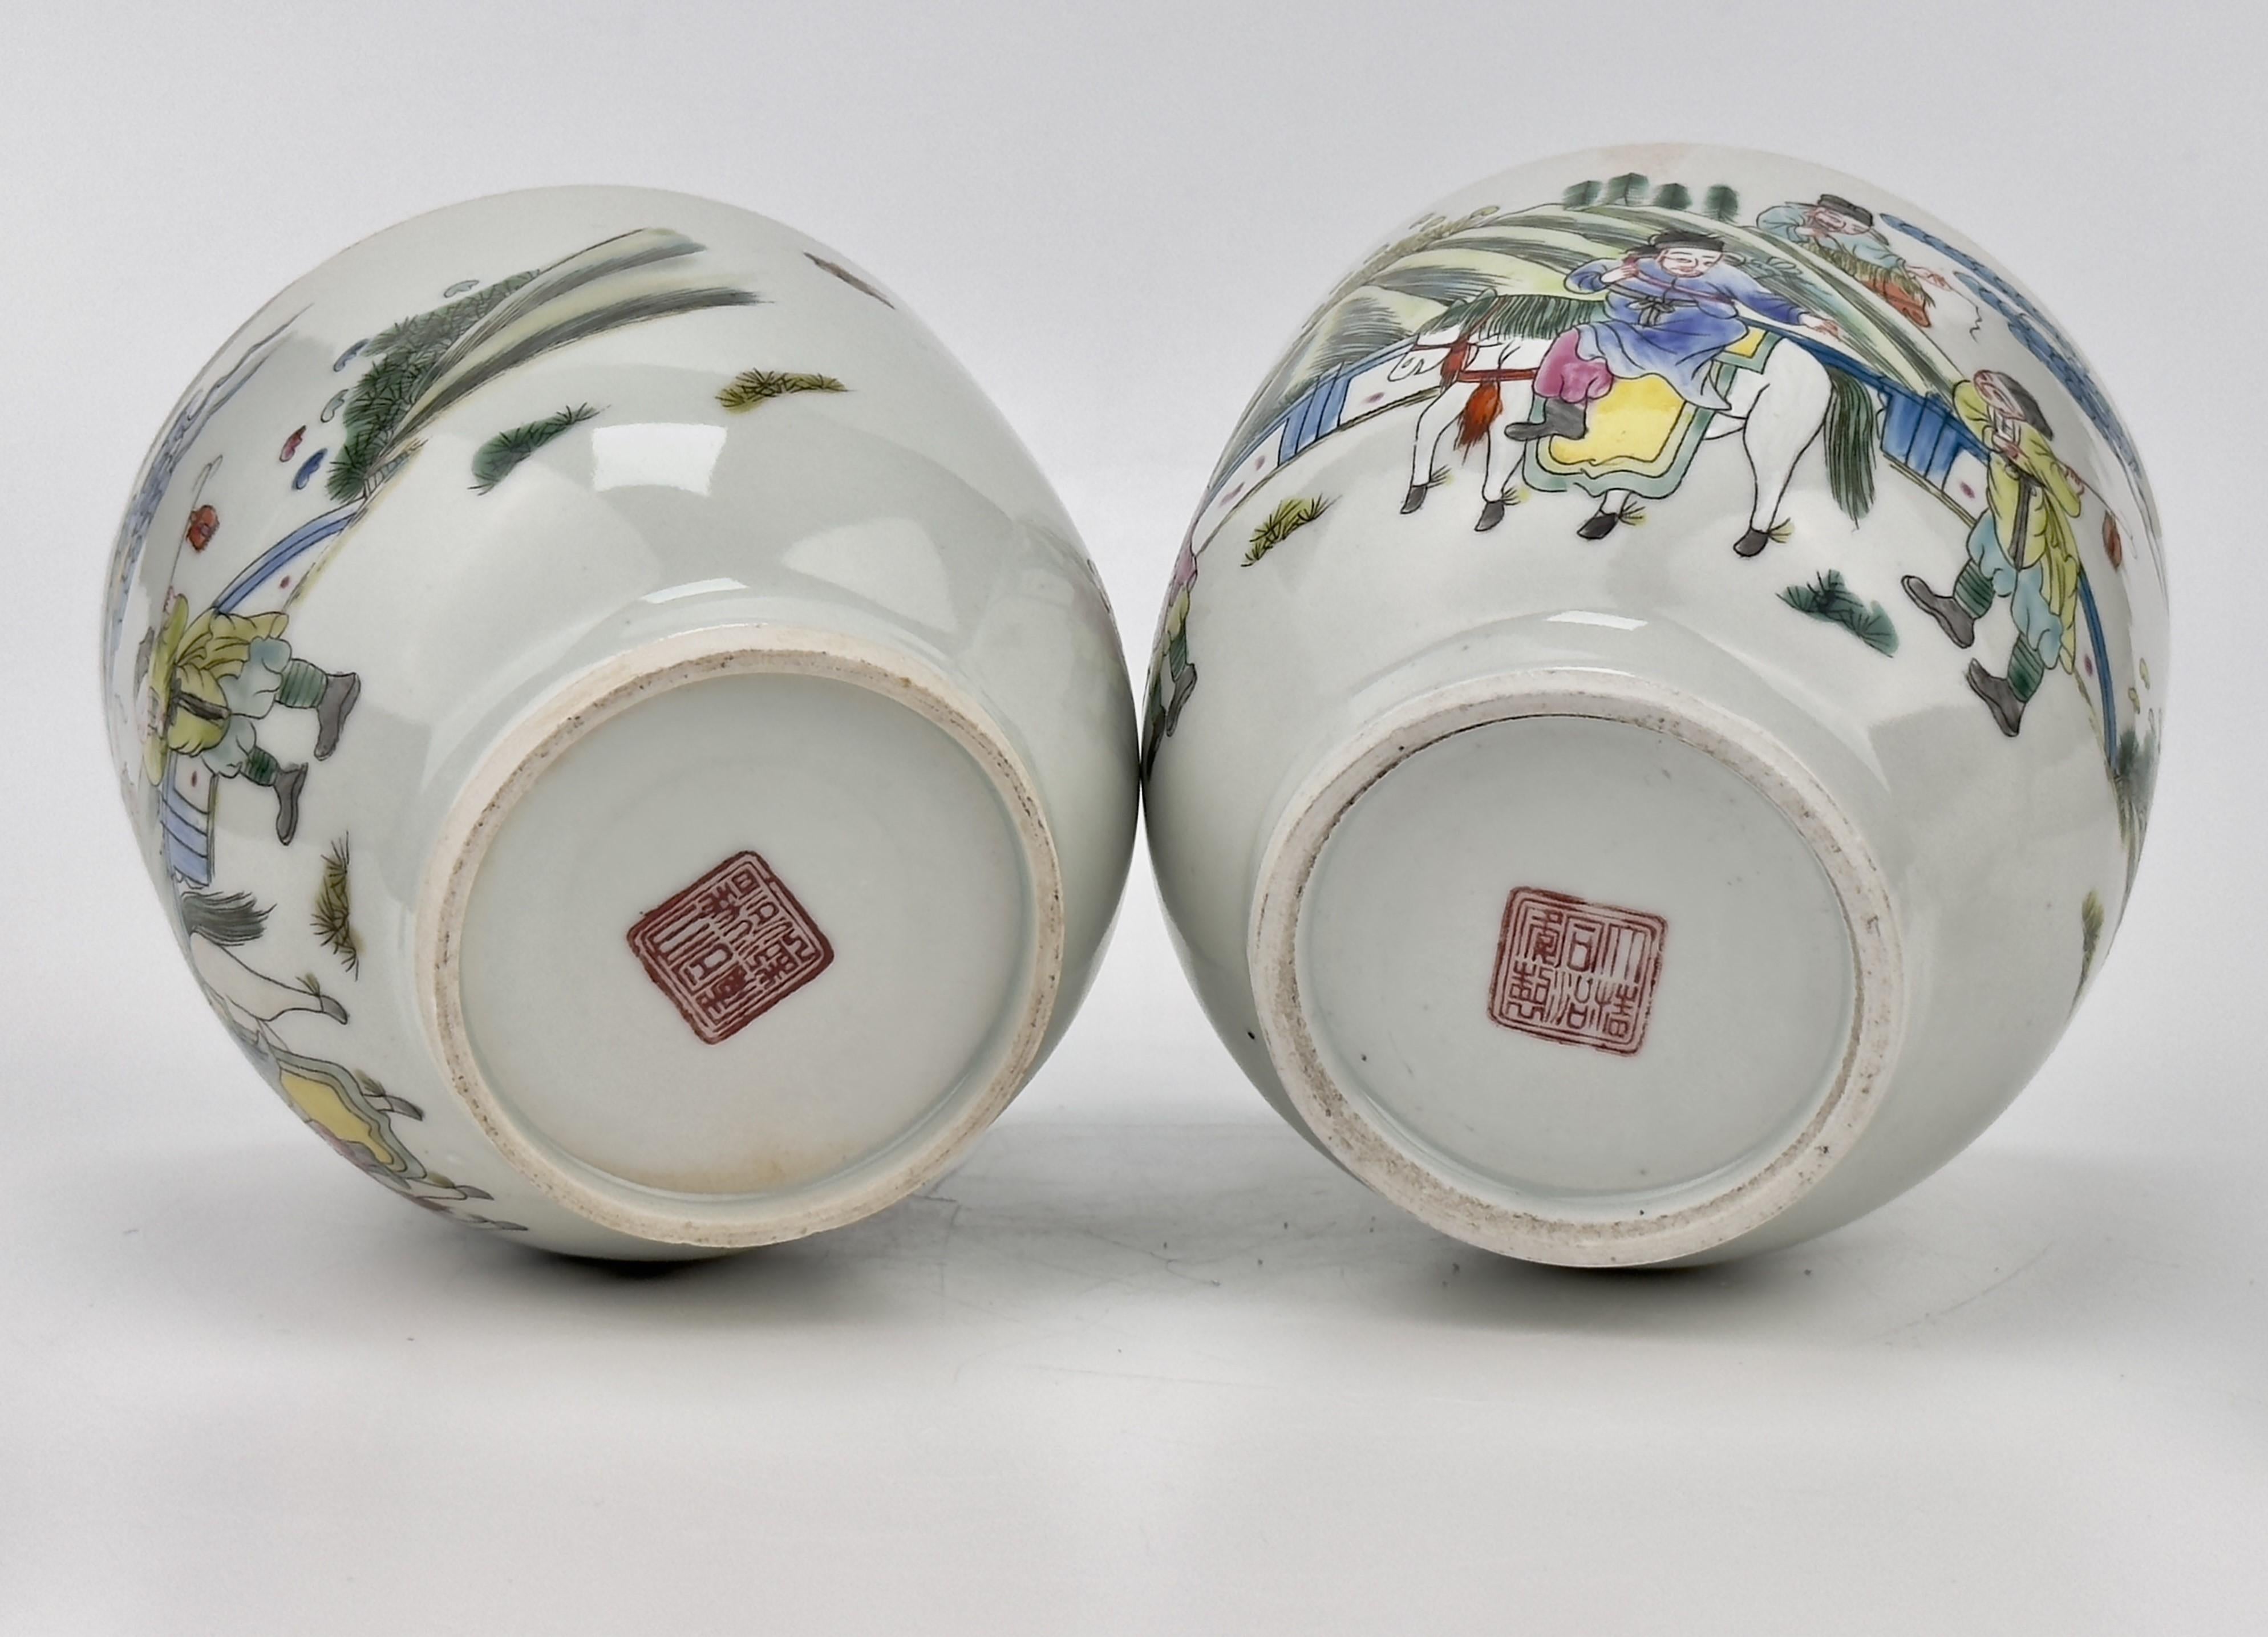 Mid-19th Century Two Chinese Famille Verte Jars with Horseback Riding, Qing Period, Tongzhi Era For Sale